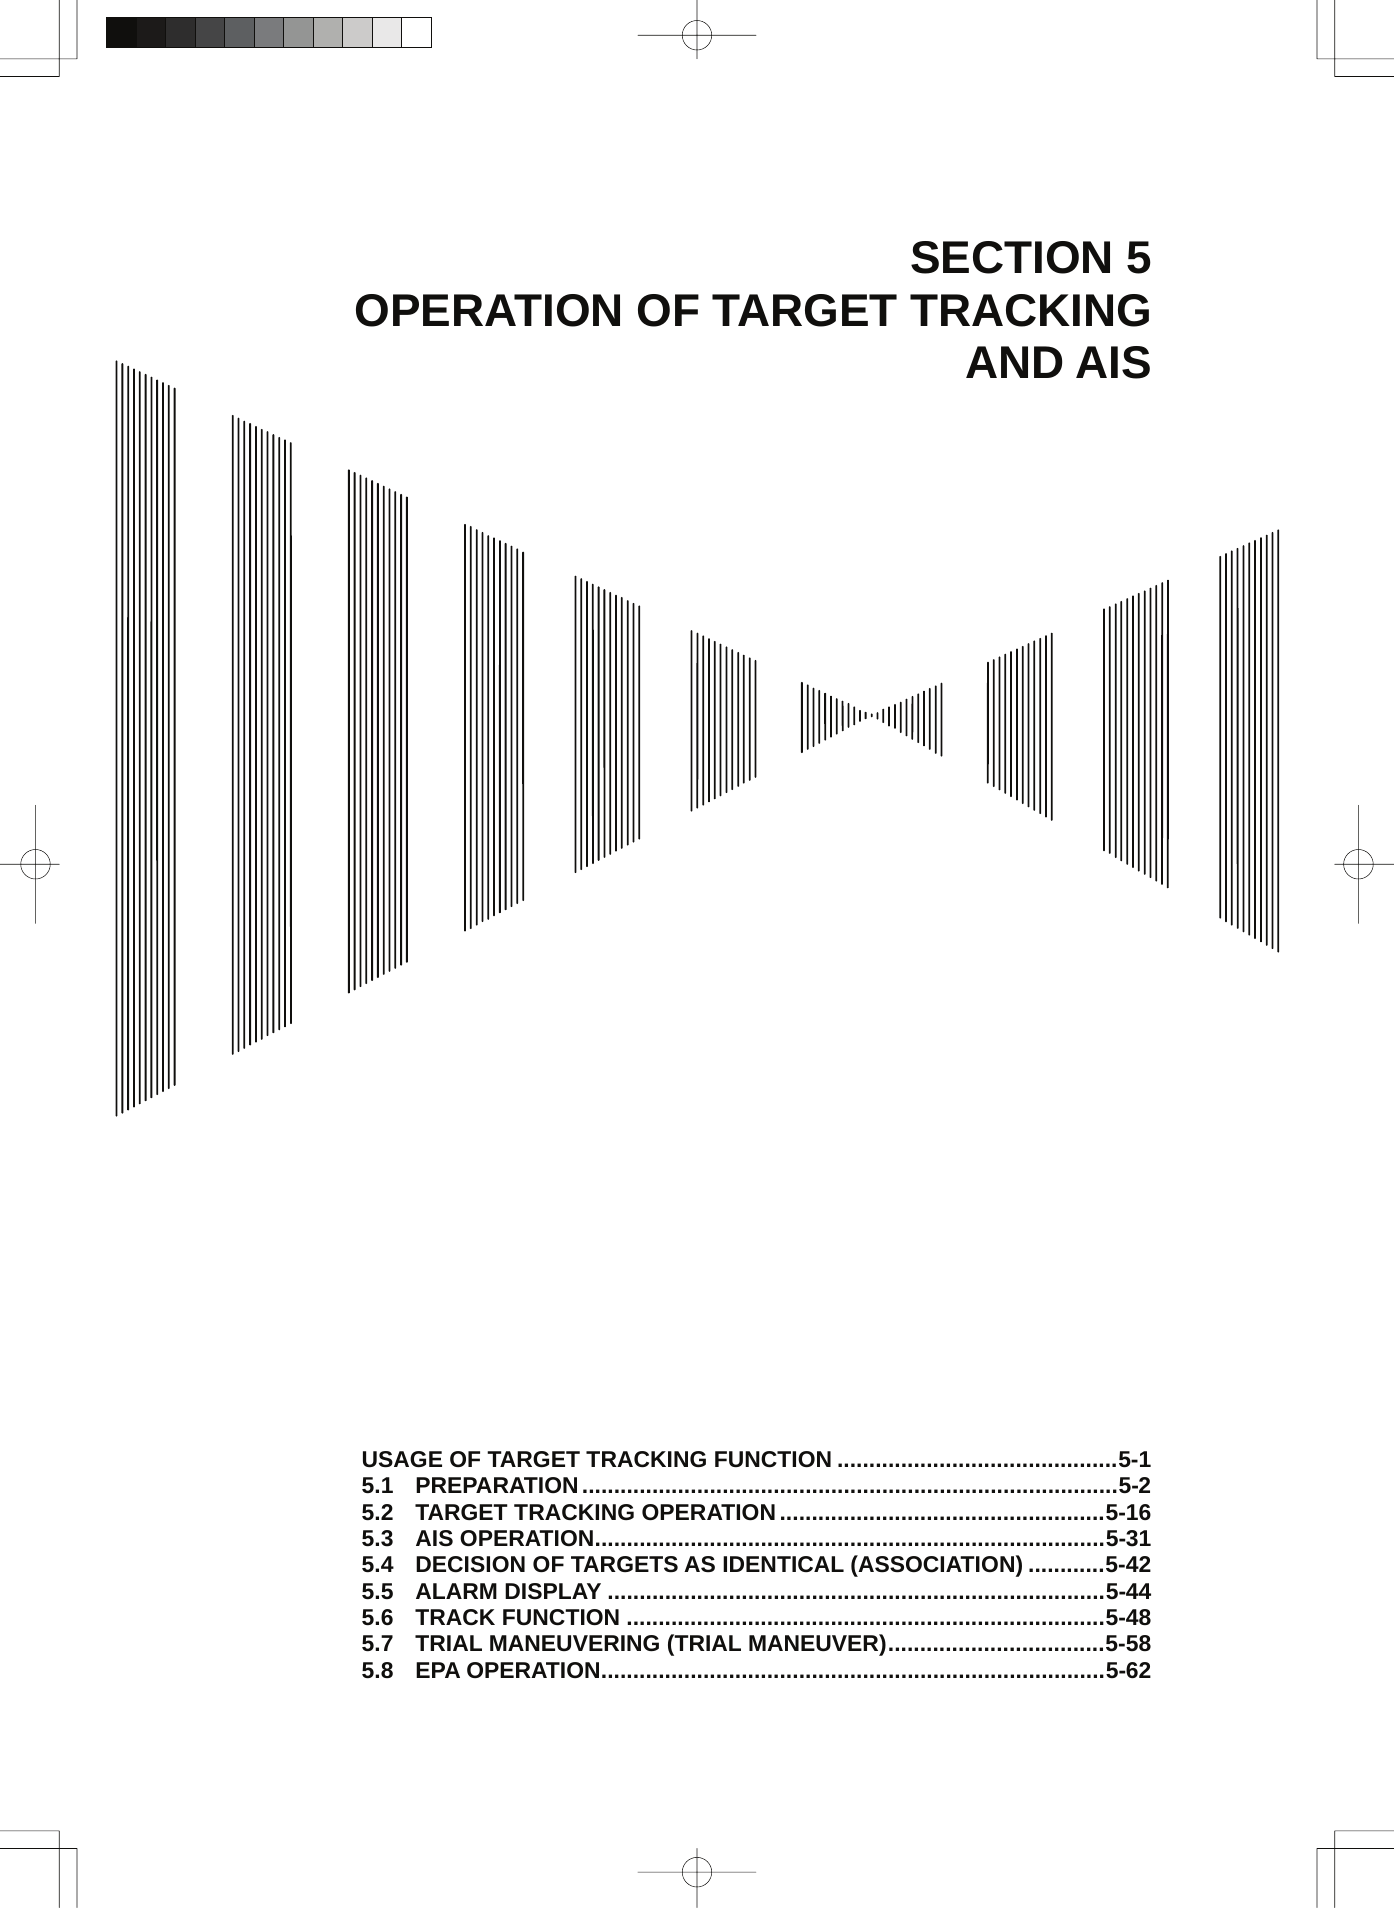  SECTION 5 OPERATION OF TARGET TRACKING AND AIS                                        USAGE OF TARGET TRACKING FUNCTION ............................................5-1 5.1 PREPARATION....................................................................................5-2 5.2 TARGET TRACKING OPERATION...................................................5-16 5.3 AIS OPERATION................................................................................5-31 5.4 DECISION OF TARGETS AS IDENTICAL (ASSOCIATION) ............5-42 5.5 ALARM DISPLAY ..............................................................................5-44 5.6 TRACK FUNCTION ...........................................................................5-48 5.7 TRIAL MANEUVERING (TRIAL MANEUVER)..................................5-58 5.8 EPA OPERATION...............................................................................5-62 